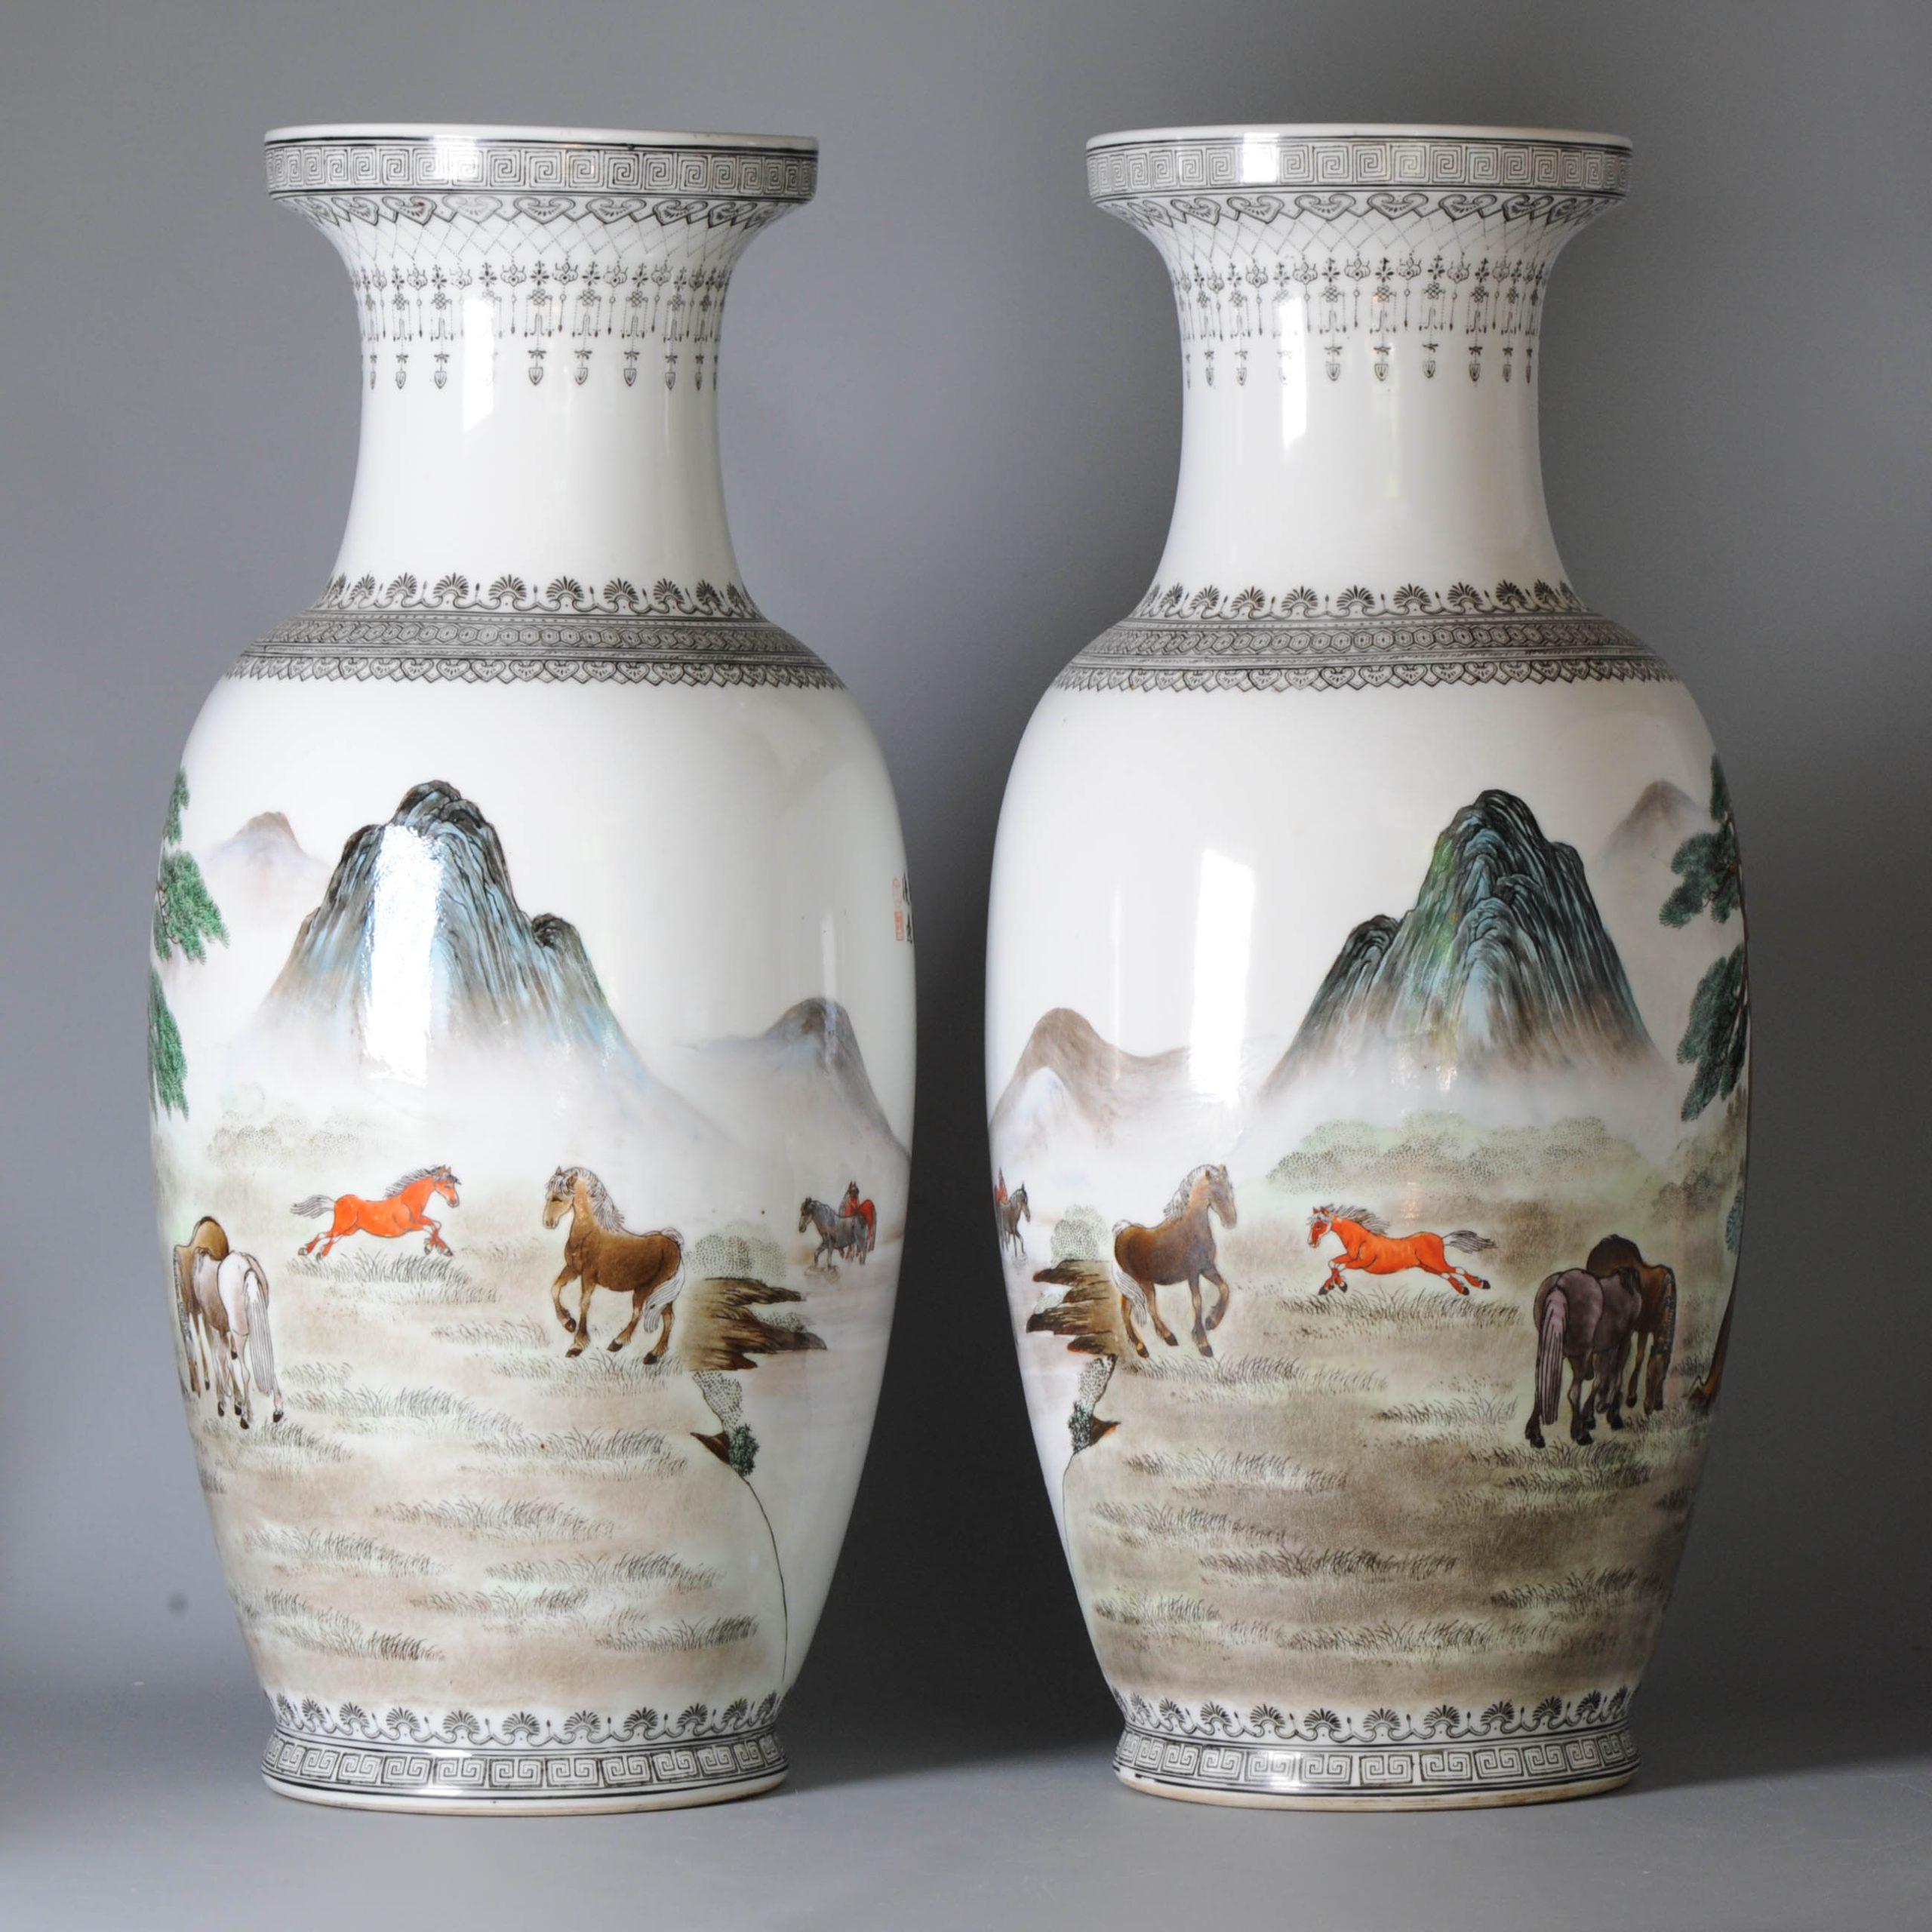 A very nicely decorated pair of vases from the PROC period. Each Vase decorated with with a scene of horses in a mountain landscape.

Both marked with a seal mark at the base.

Condition
Overall Condition Perfect. Size: approx. 460x200mm